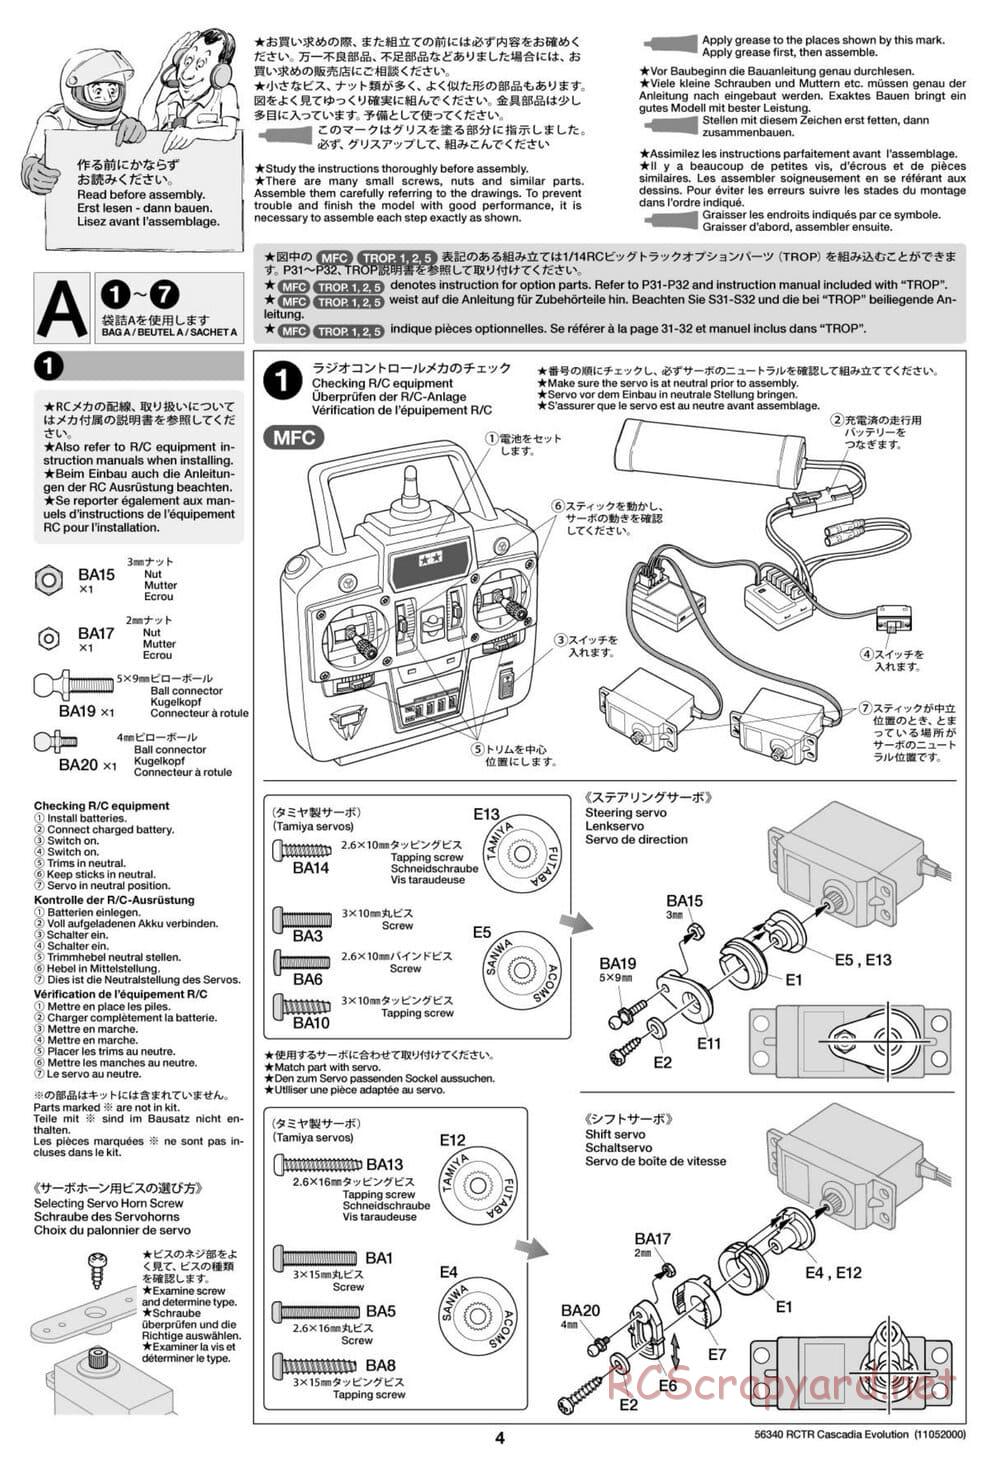 Tamiya - Freightliner Cascadia Evolution Tractor Truck Chassis - Manual - Page 4